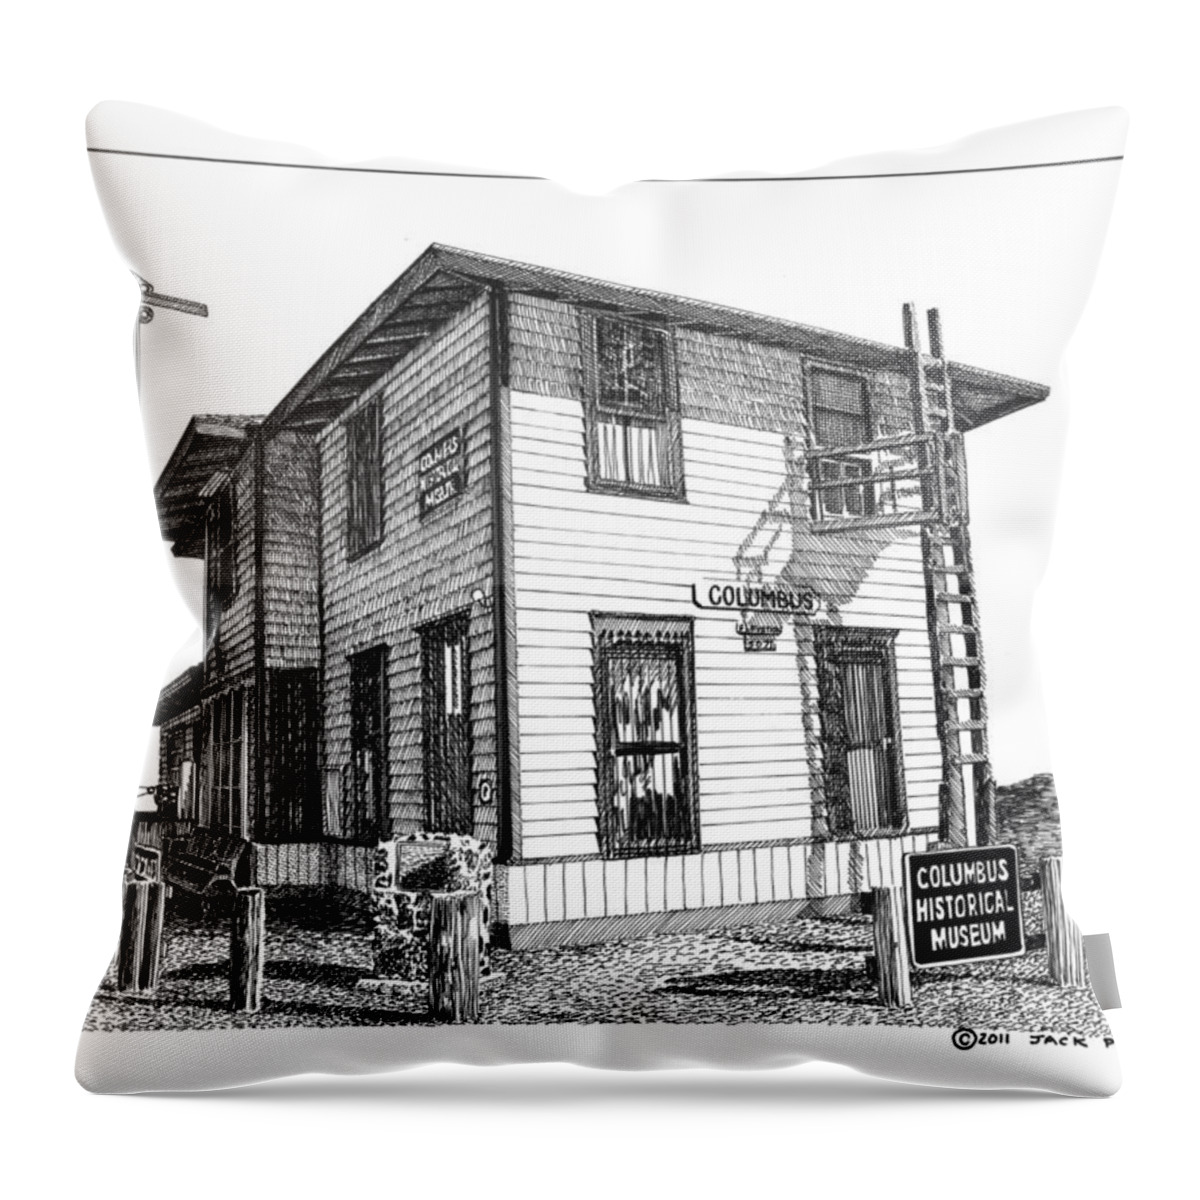 Framed Prints And Note Cards Of Ink Drawings Of Scenic Southern New Mexico. Framed Canvas Prints Of Pen And Ink Images Of Southern New Mexico. Black And White Art Of Southern New Mexico Throw Pillow featuring the drawing Columbus New Mexico by Jack Pumphrey